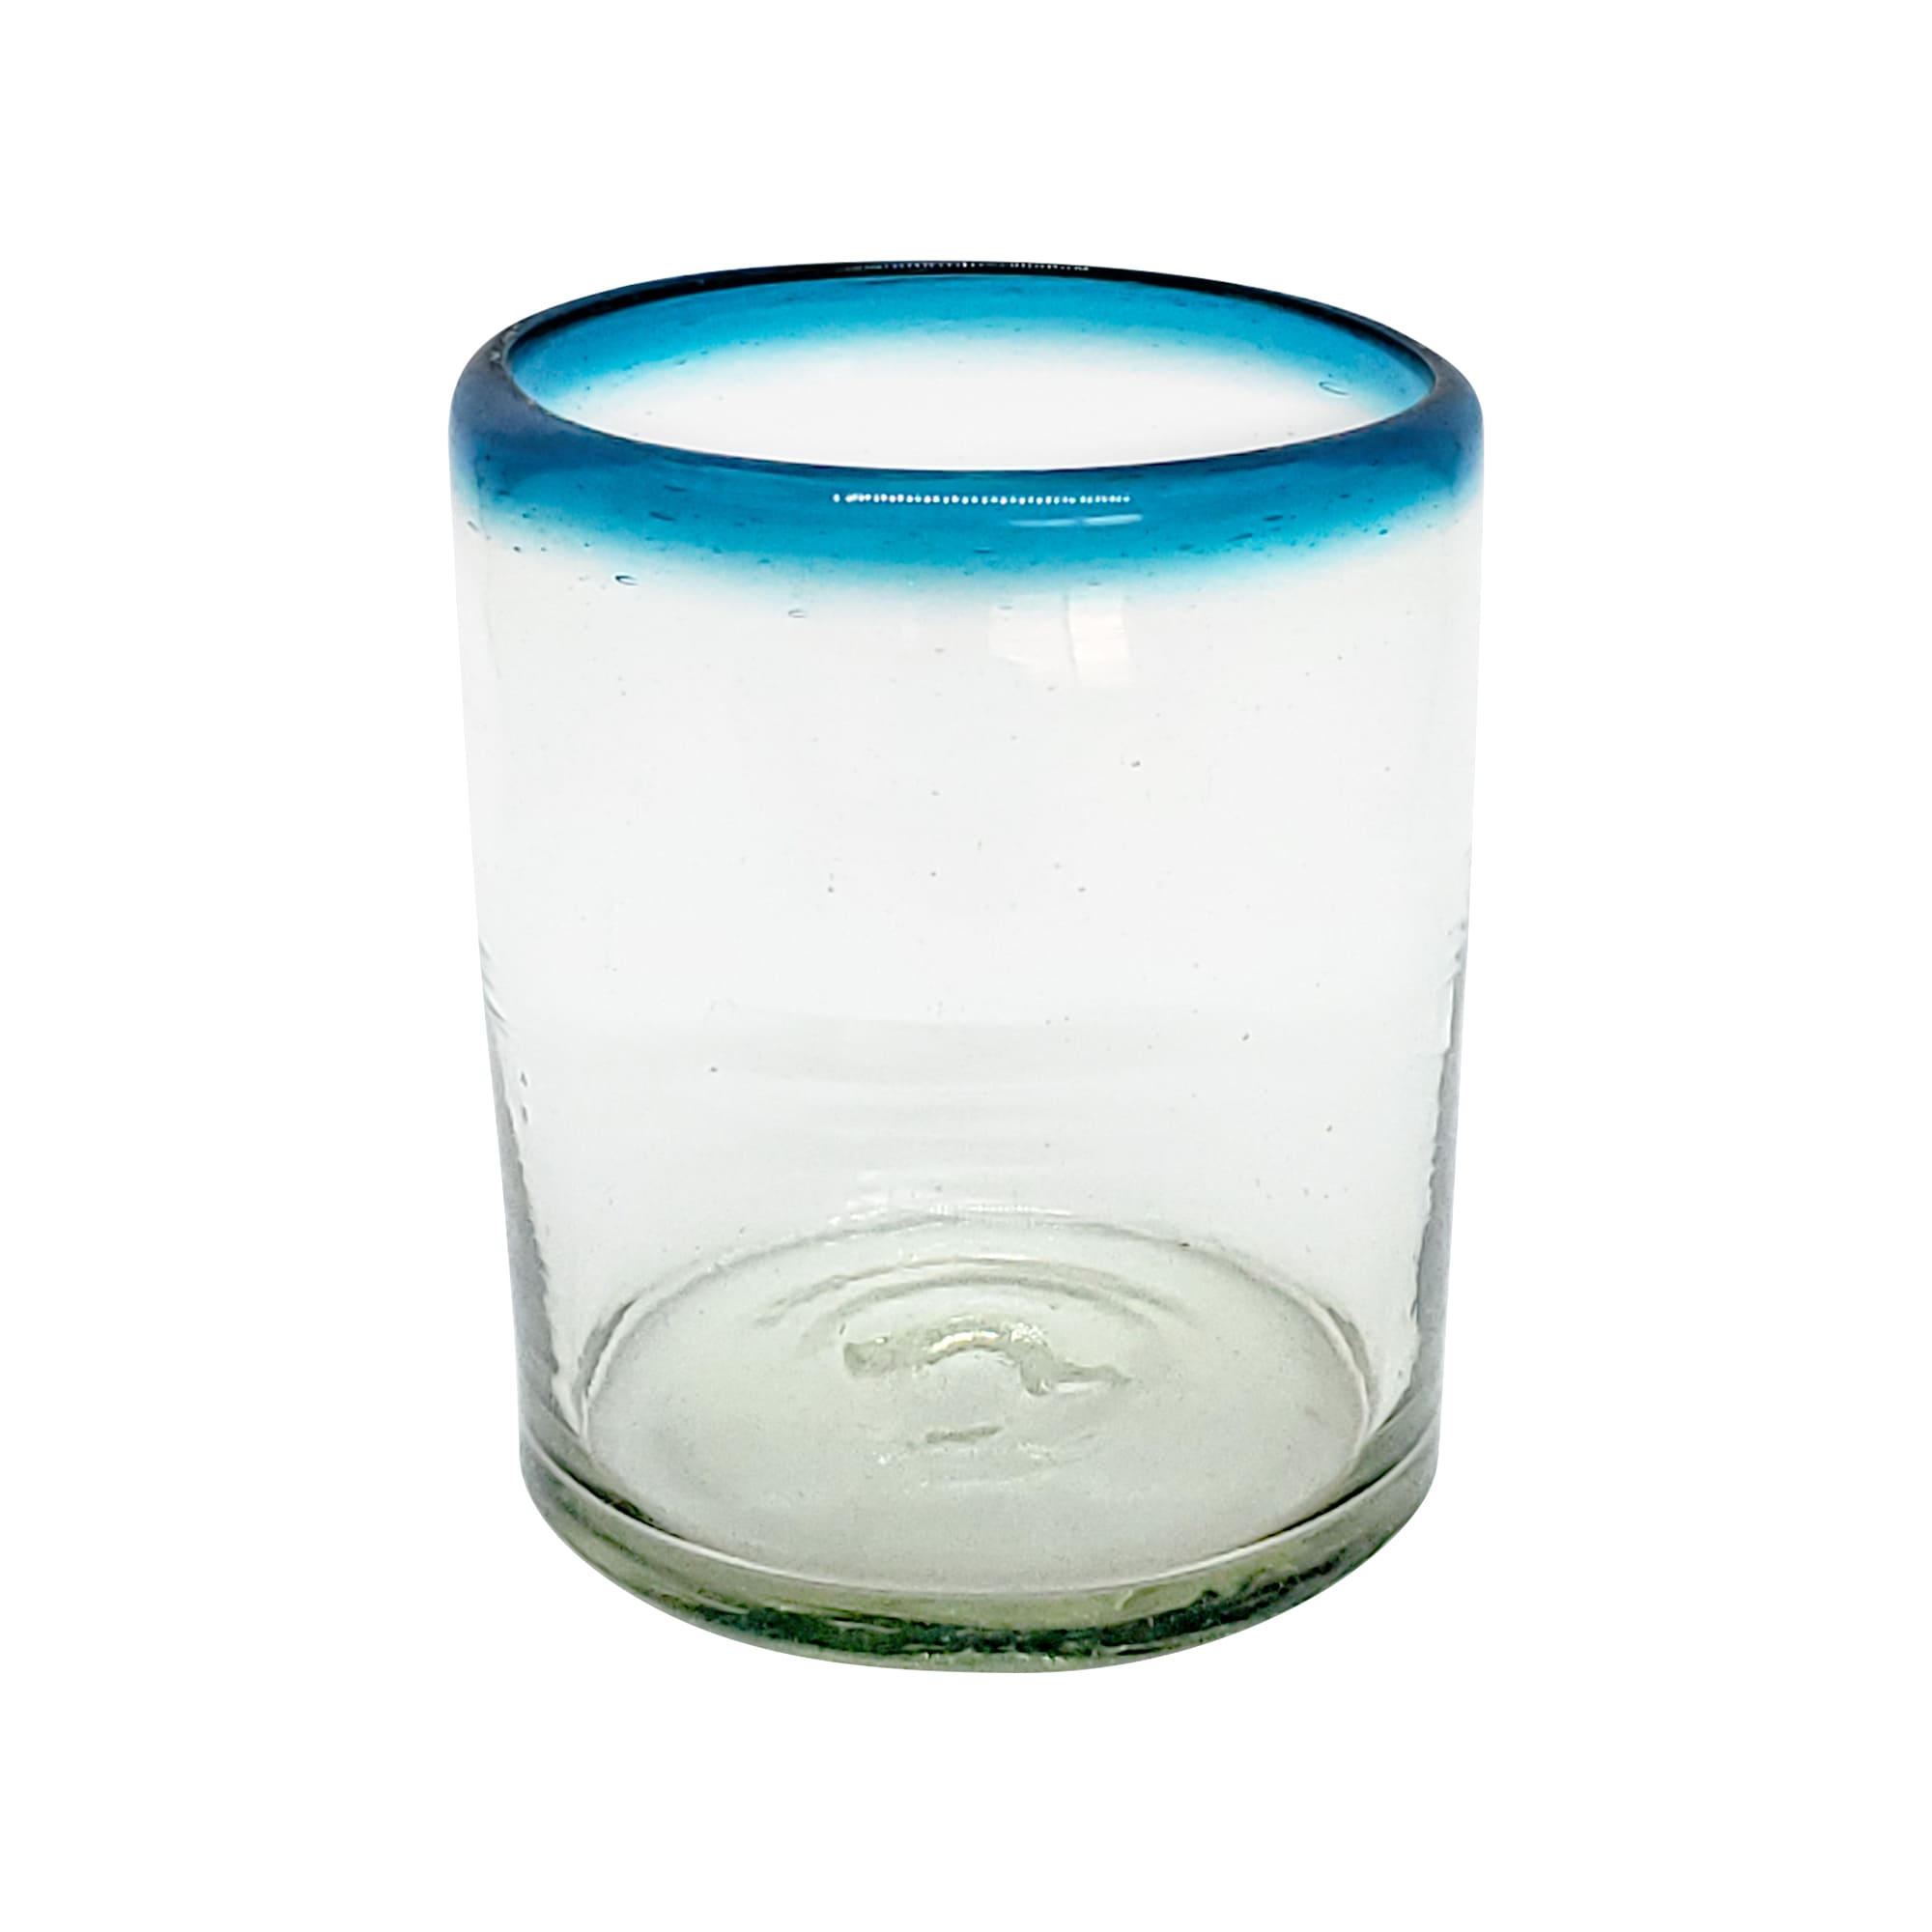 Mexican Glasses / Aqua Blue Rim 10 oz Tumblers (set of 6) / These tumblers are a great complement for your pitcher and drinking glasses set.<br>1-Year Product Replacement in case of defects (glasses broken in dishwasher is considered a defect).